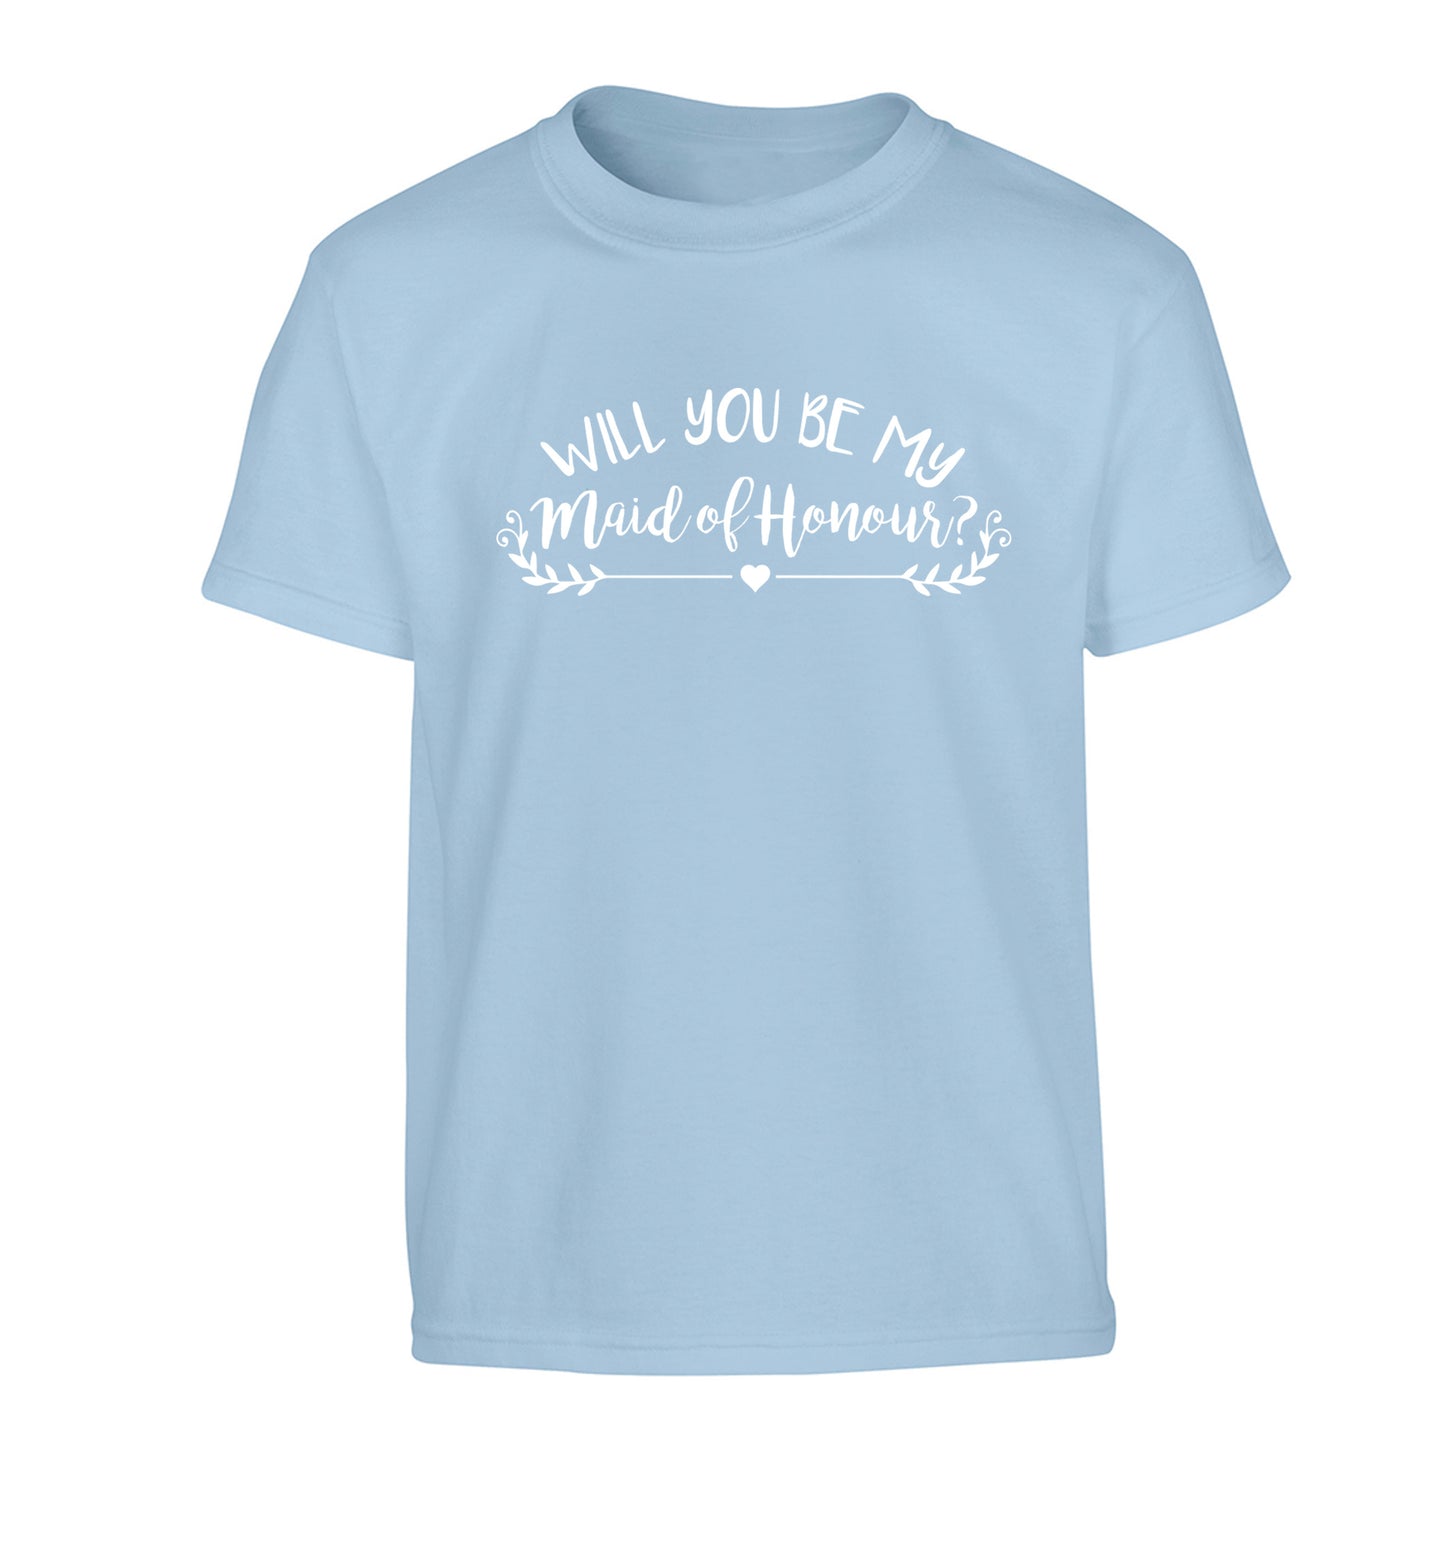 Will you be my maid of honour? Children's light blue Tshirt 12-14 Years